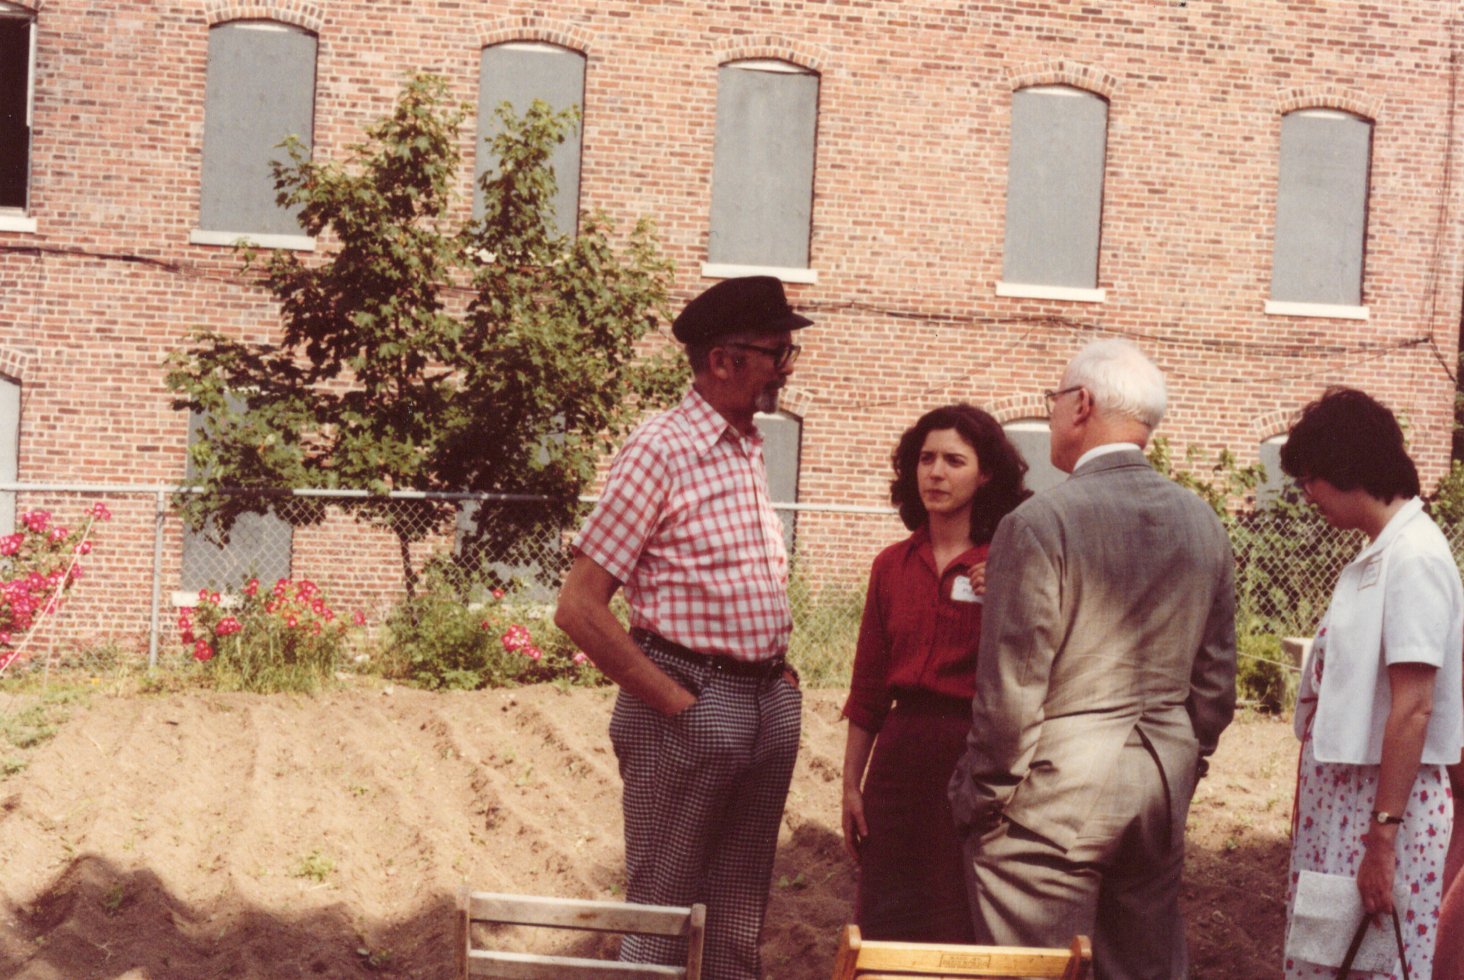 a 1980s photo showing a group of people talking outside an abandoned building and the site of an upcoming community garden